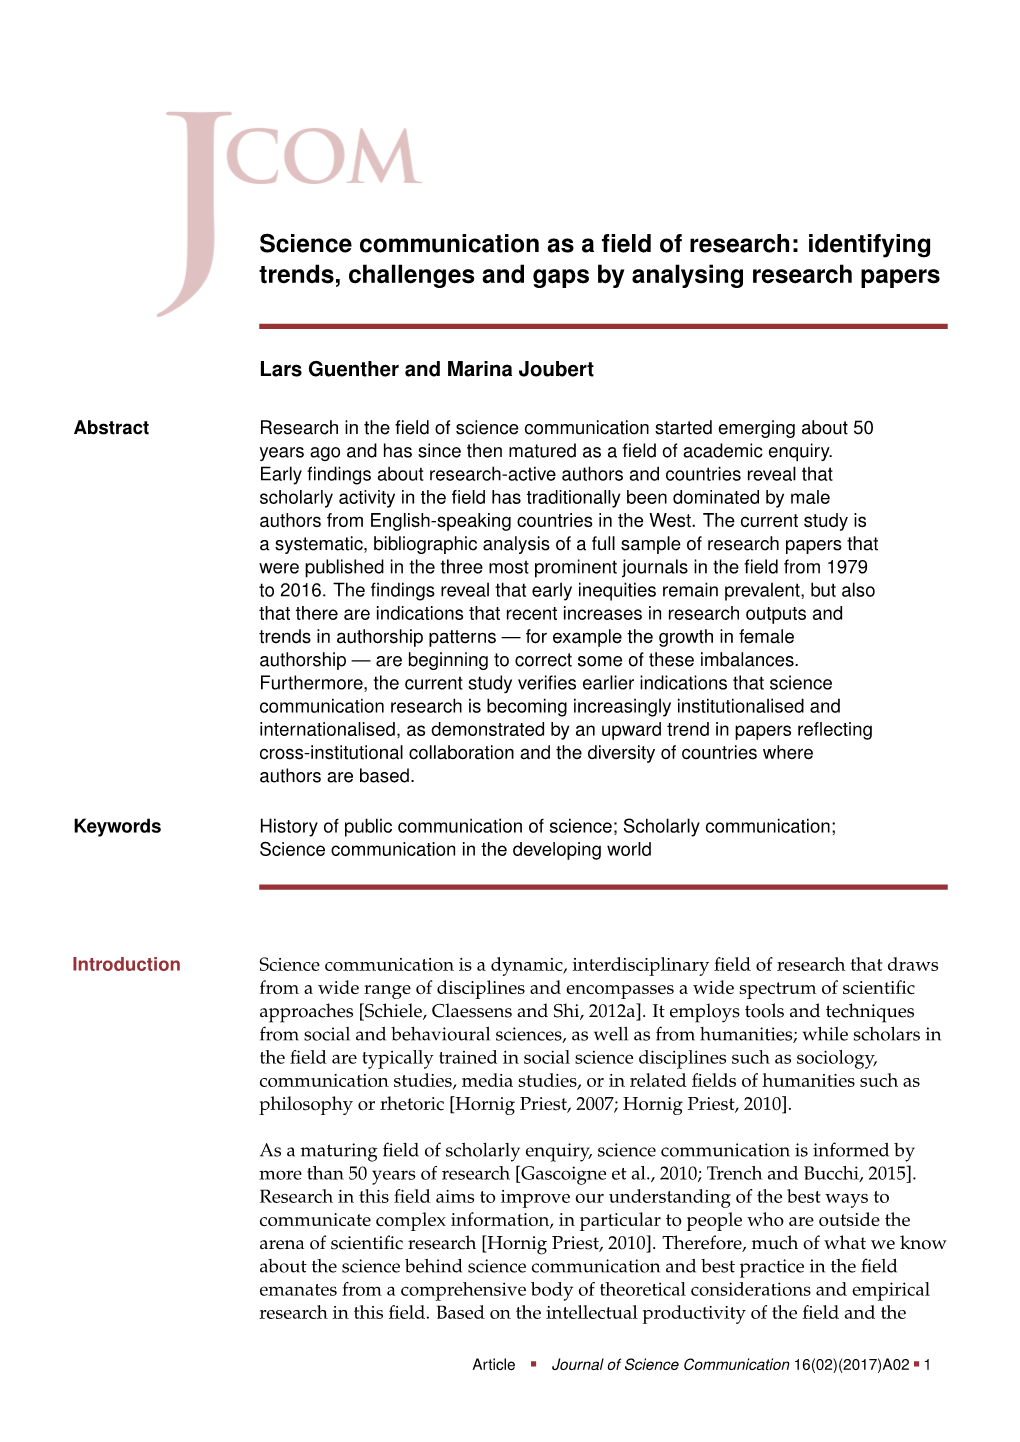 Science Communication As a Field of Research